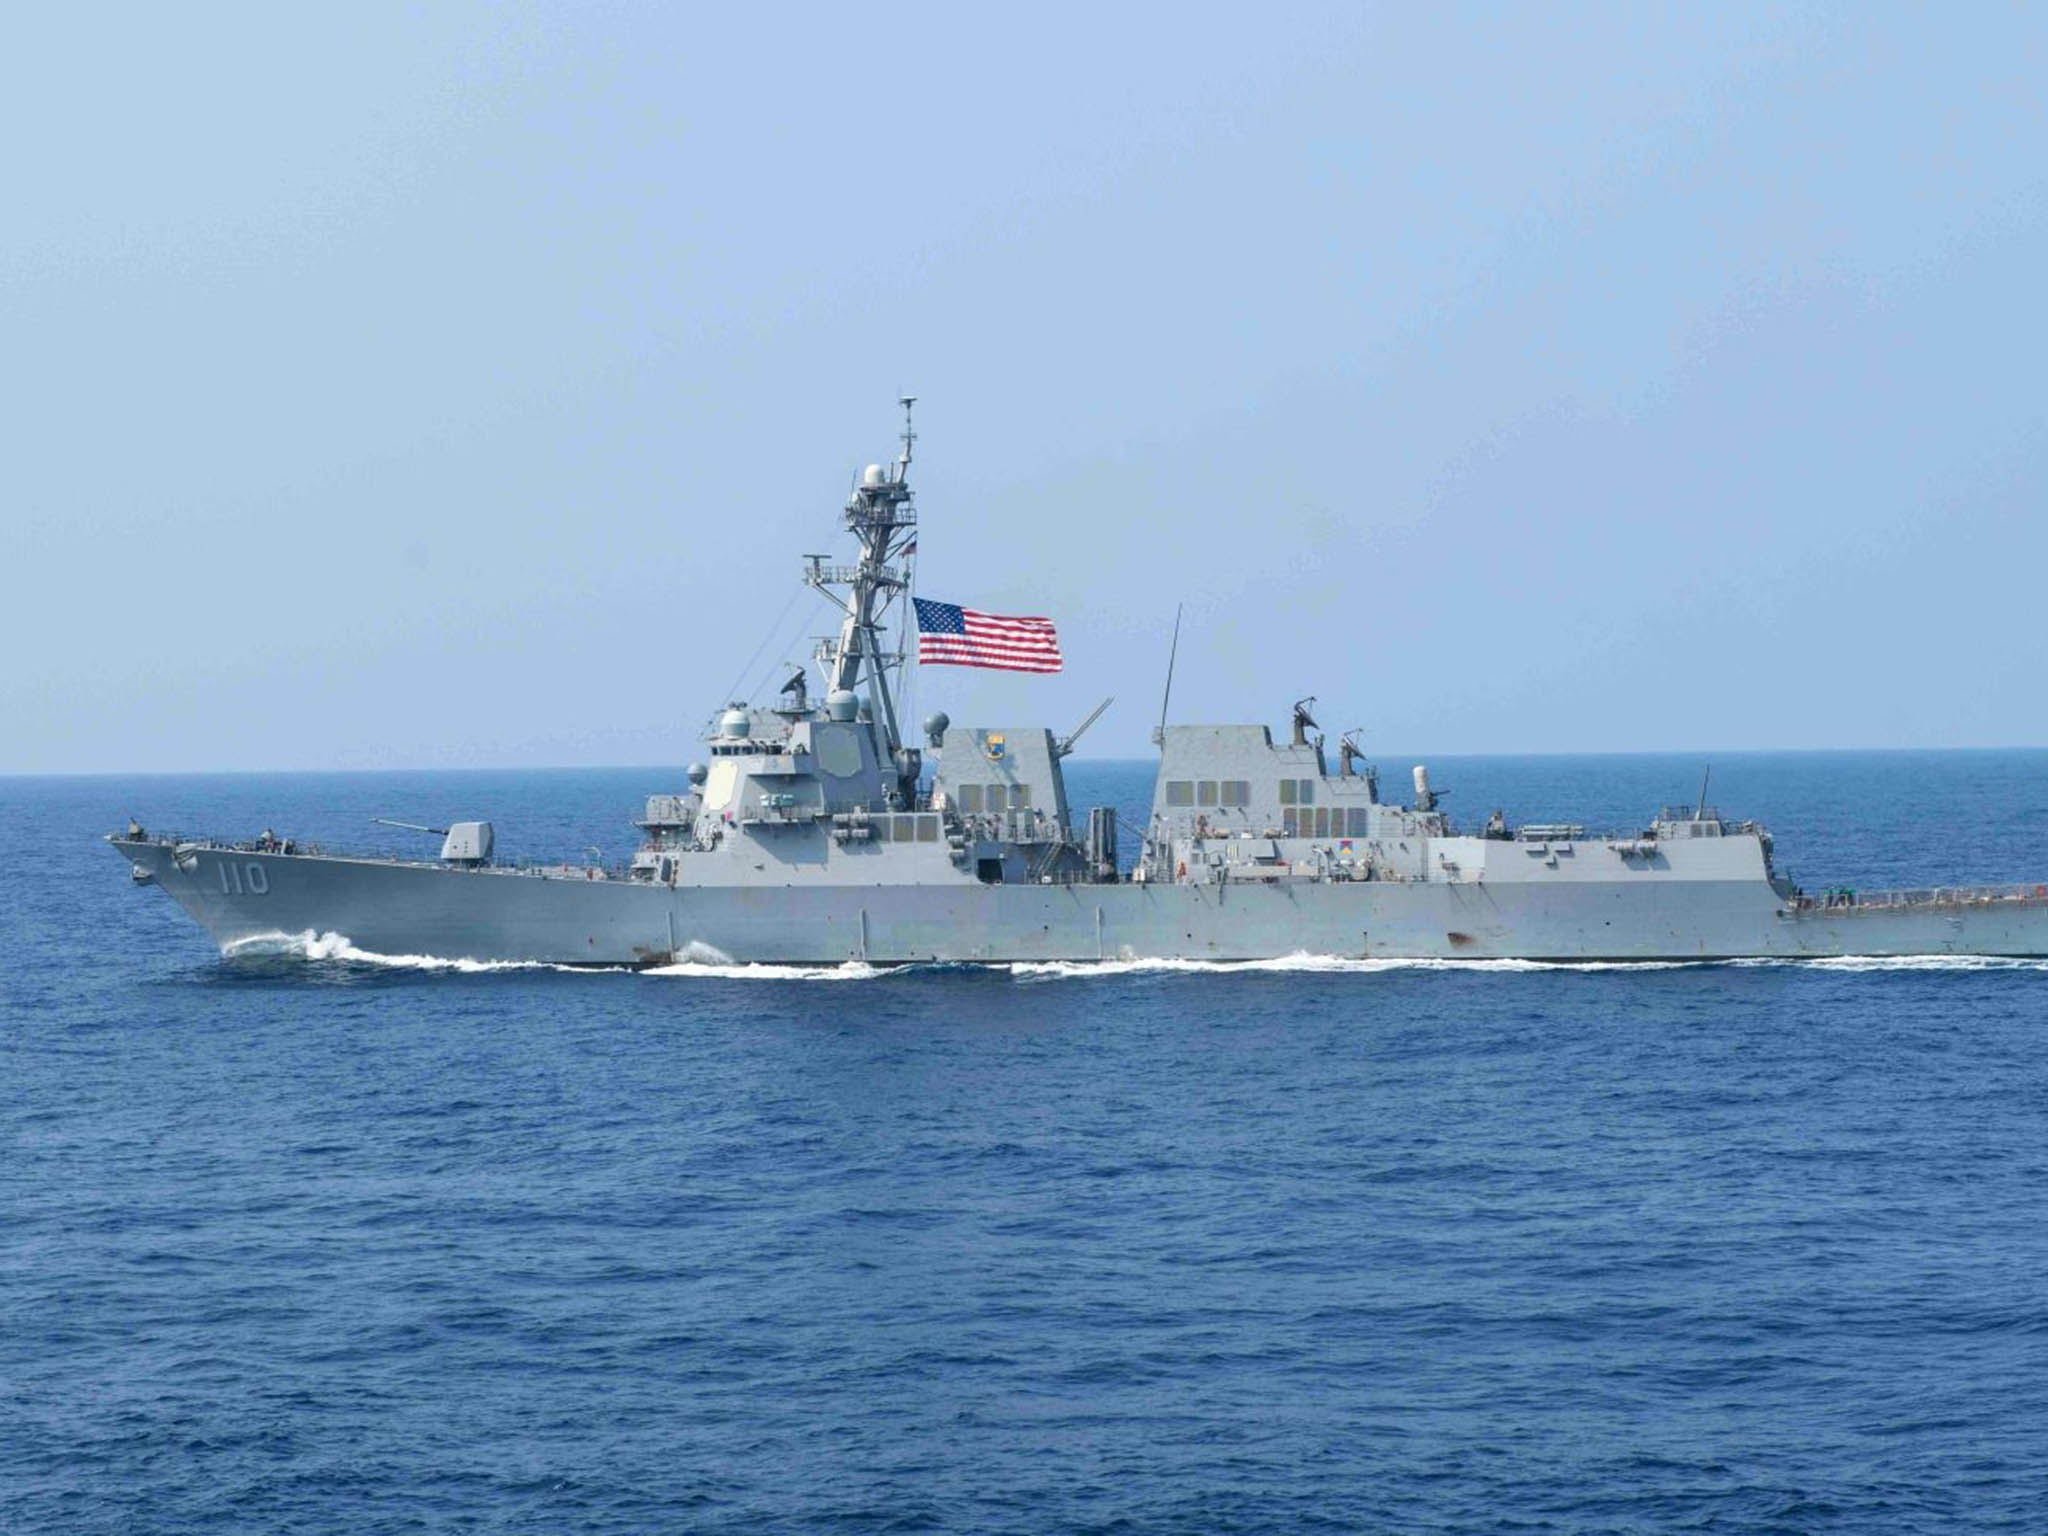 USS William P. Lawrence transits the Philippine Sea before sailing close to the disputed South China Sea reef